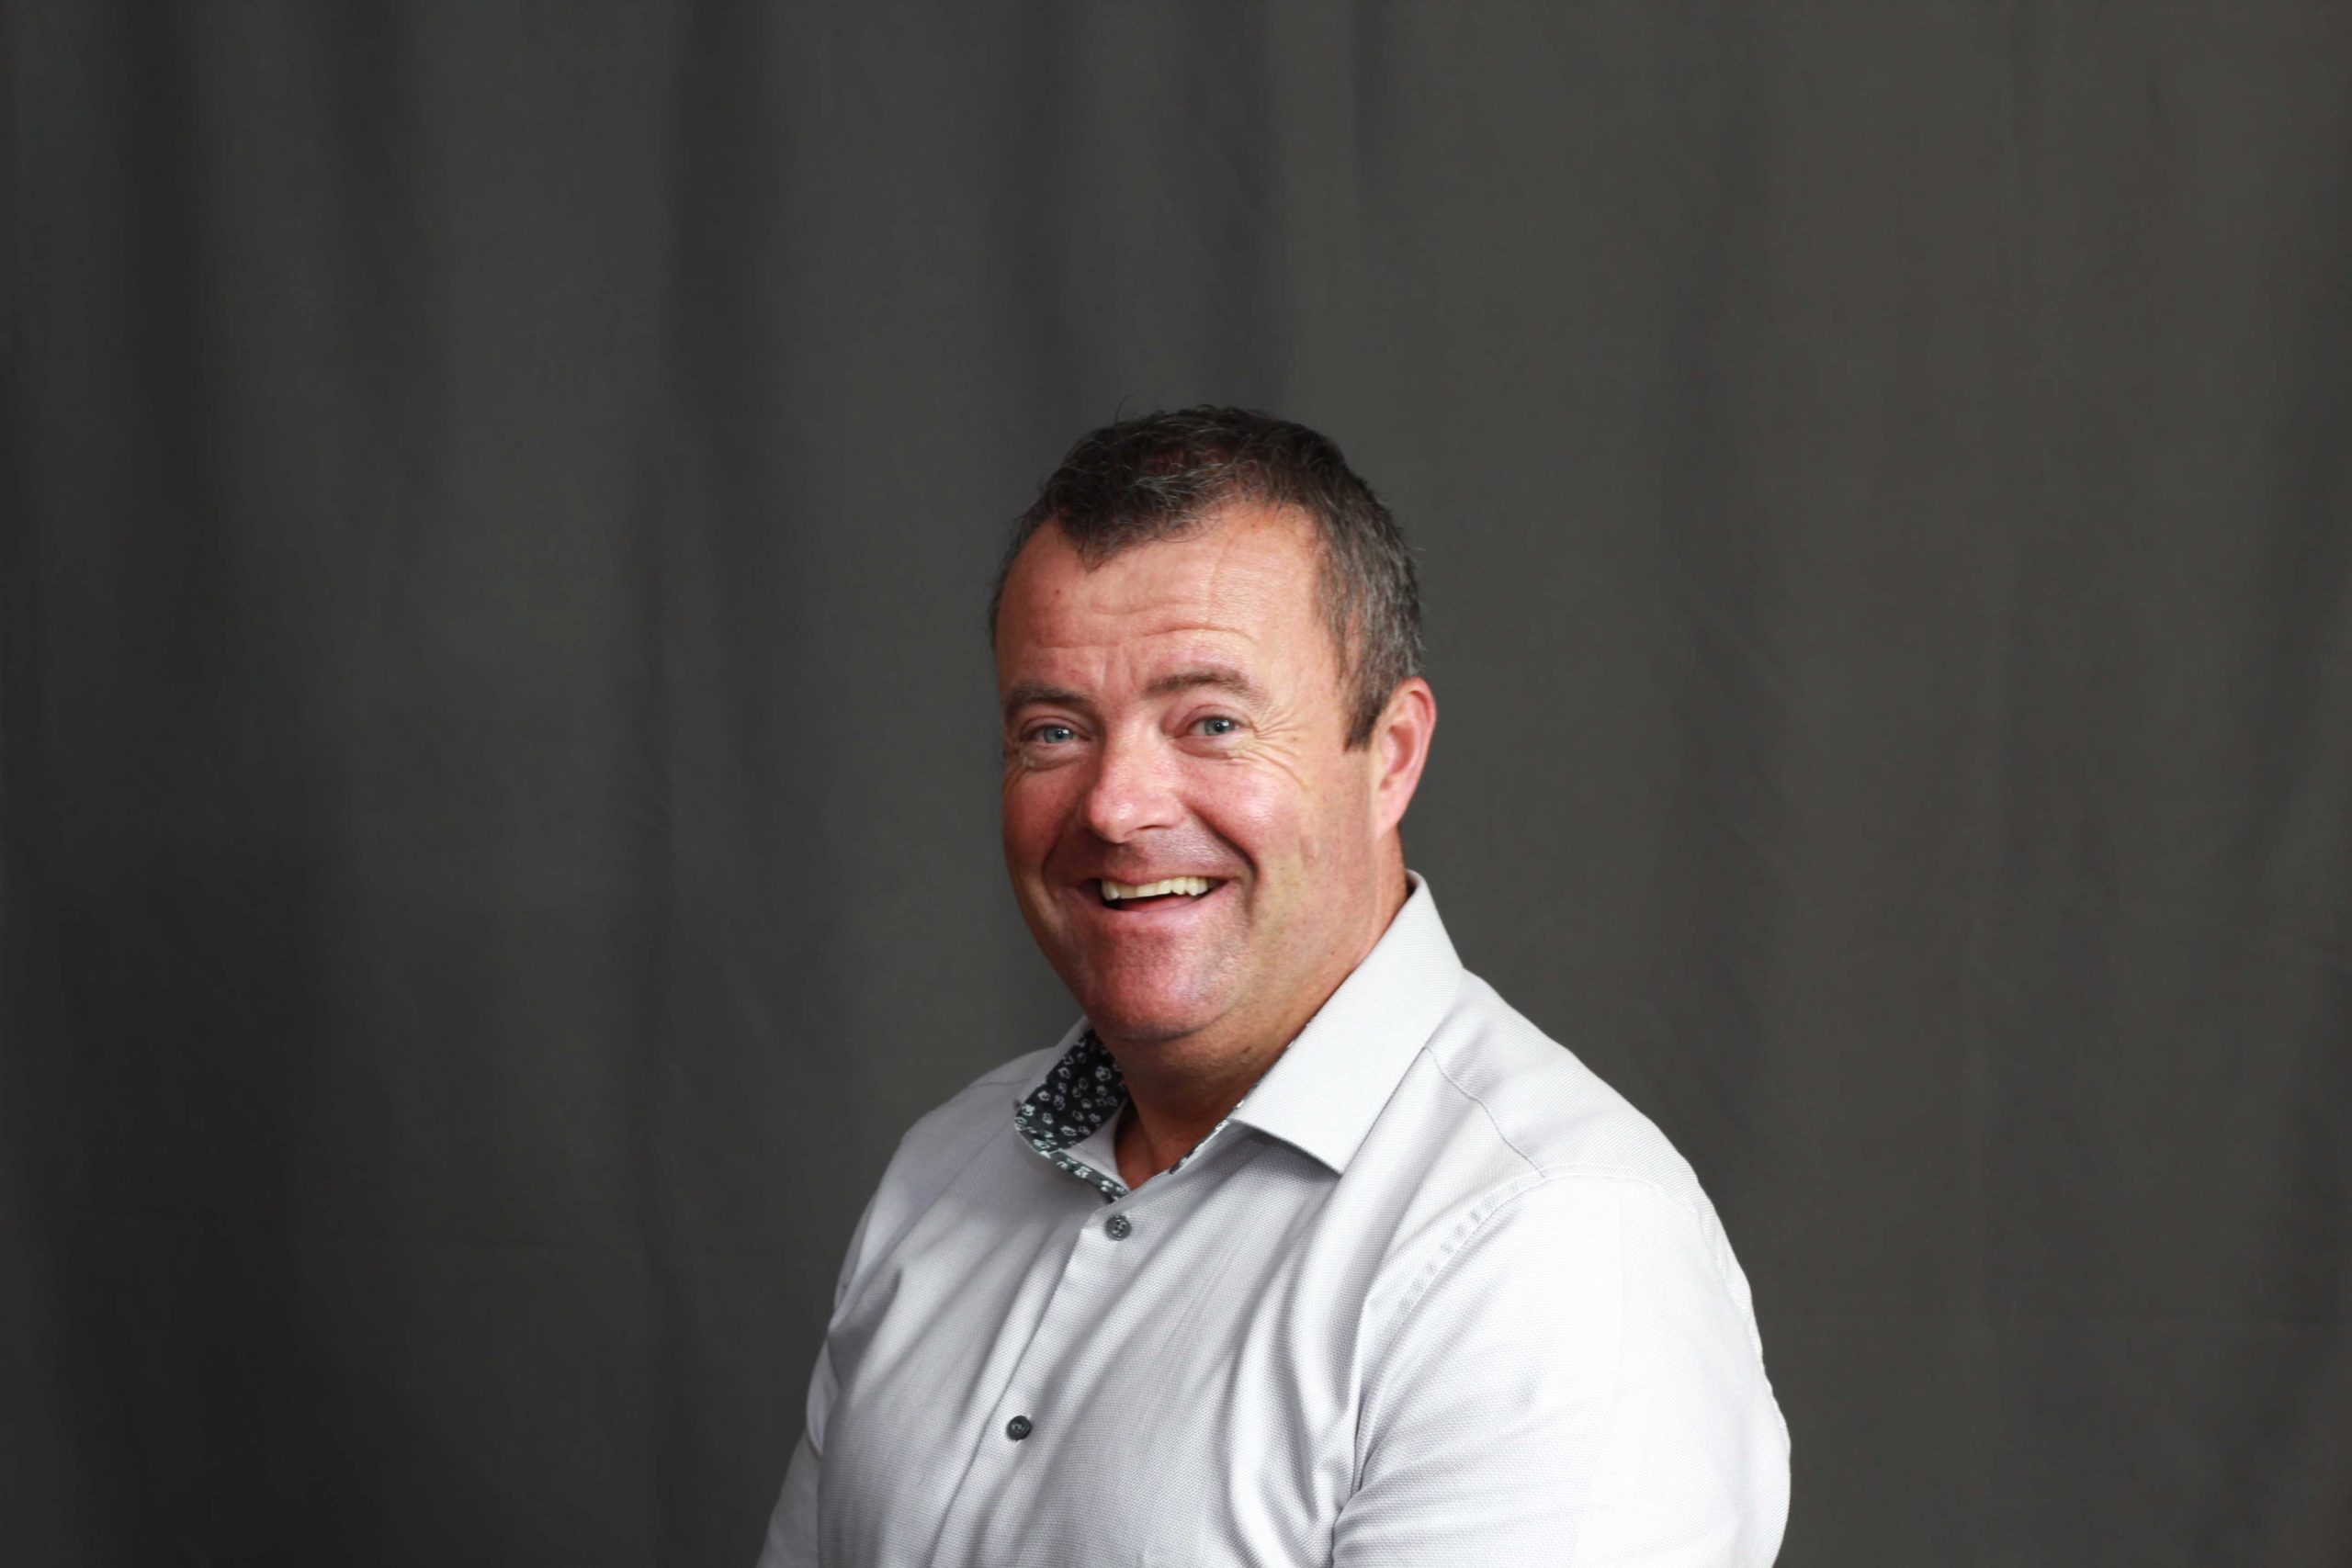 Meet our Regional Project Manager for the South West of England and South Wales, Paul